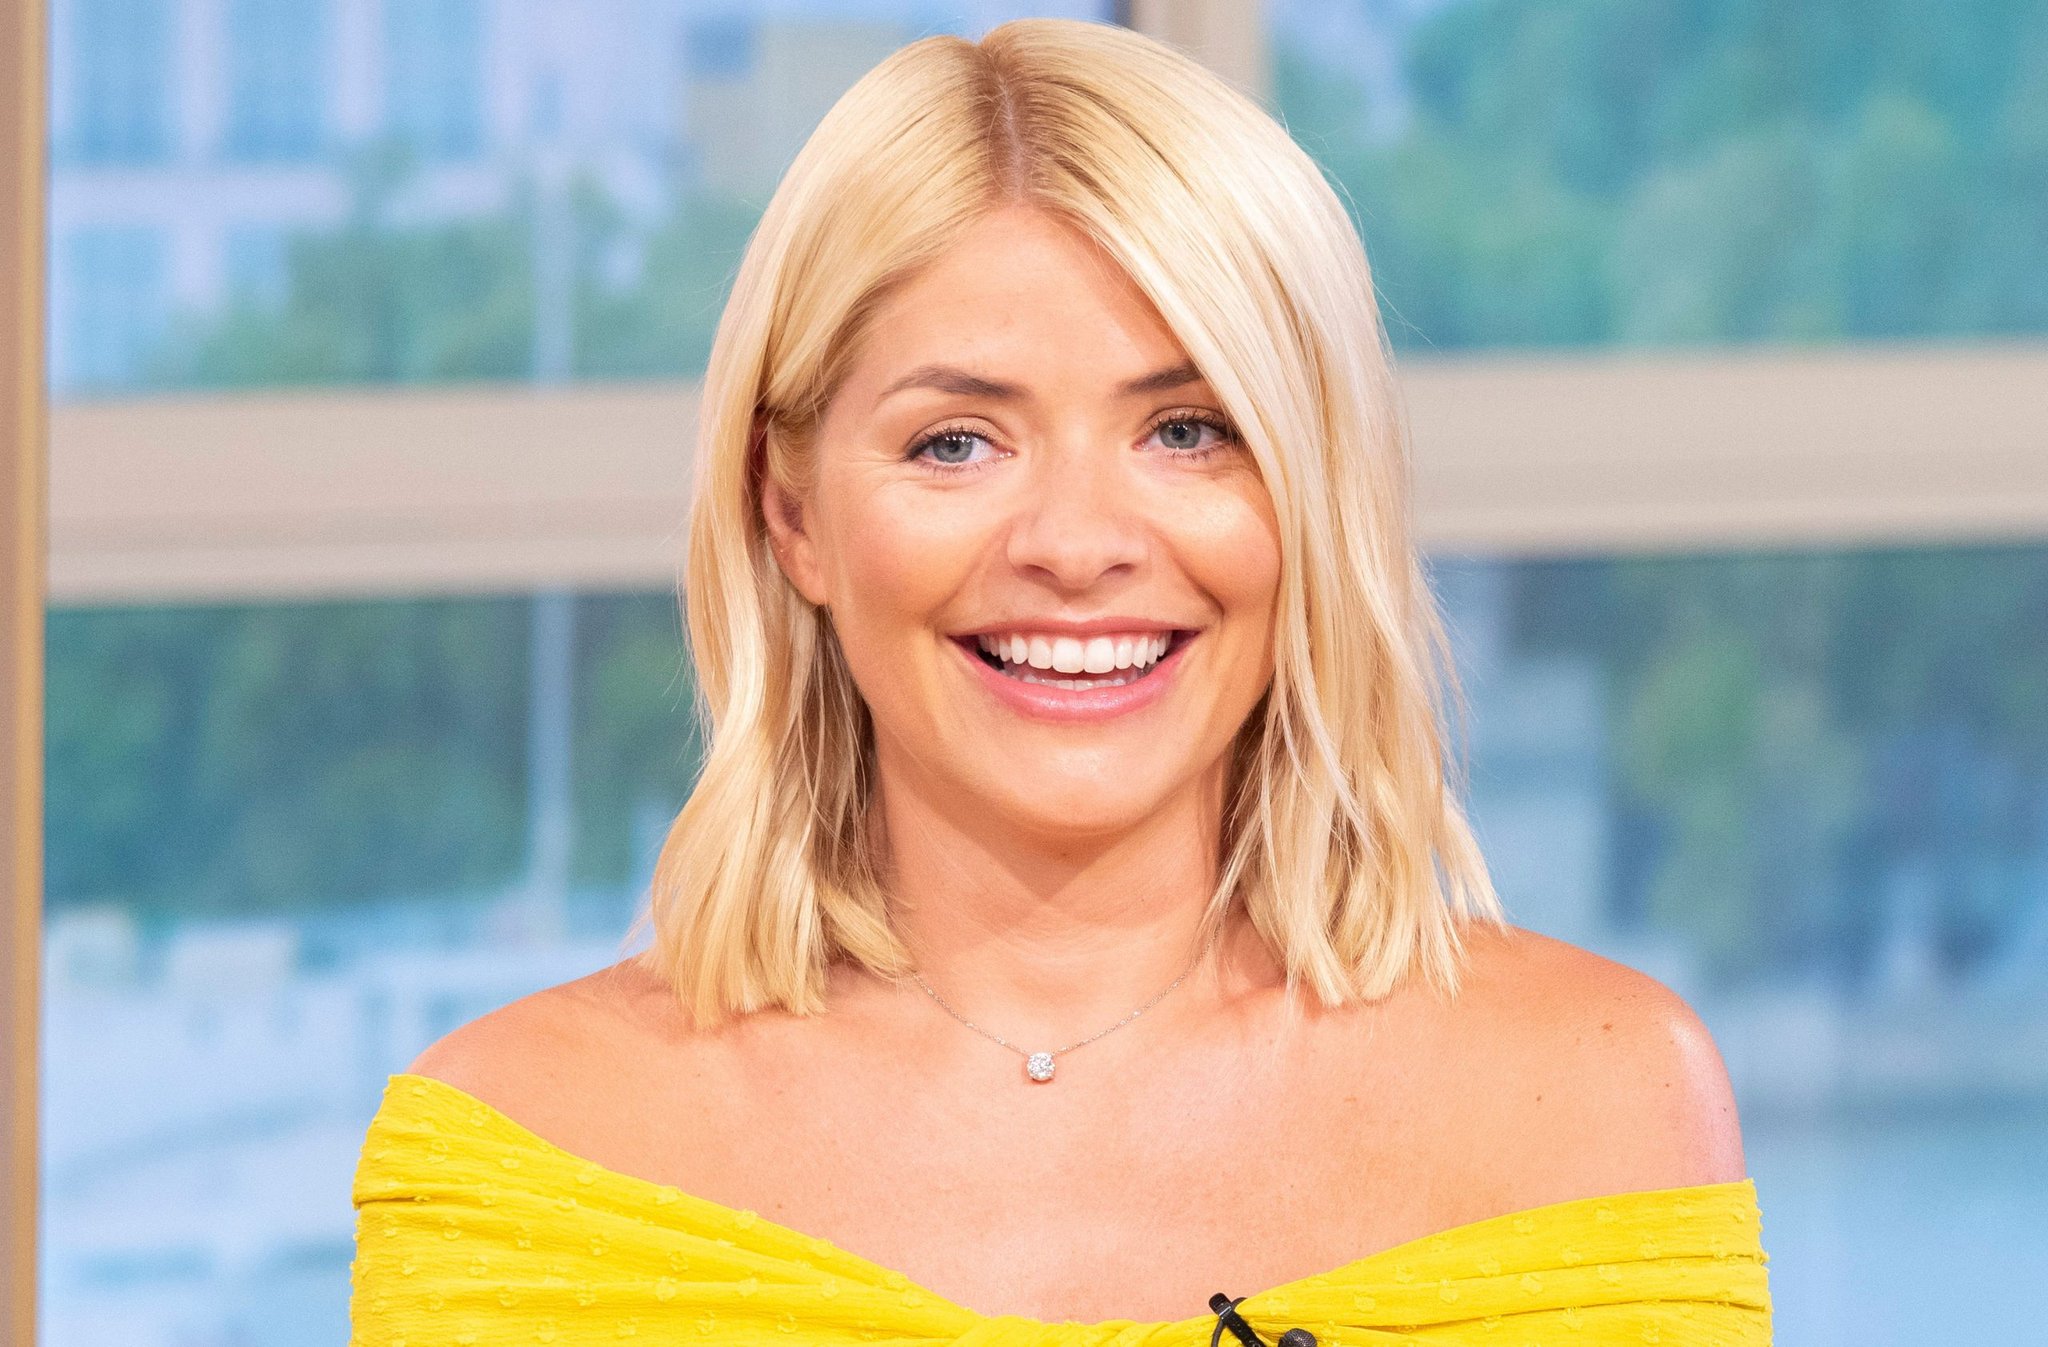 A happy birthday to Good Morning presenter, Holly Willoughby, 40 today. COYS 